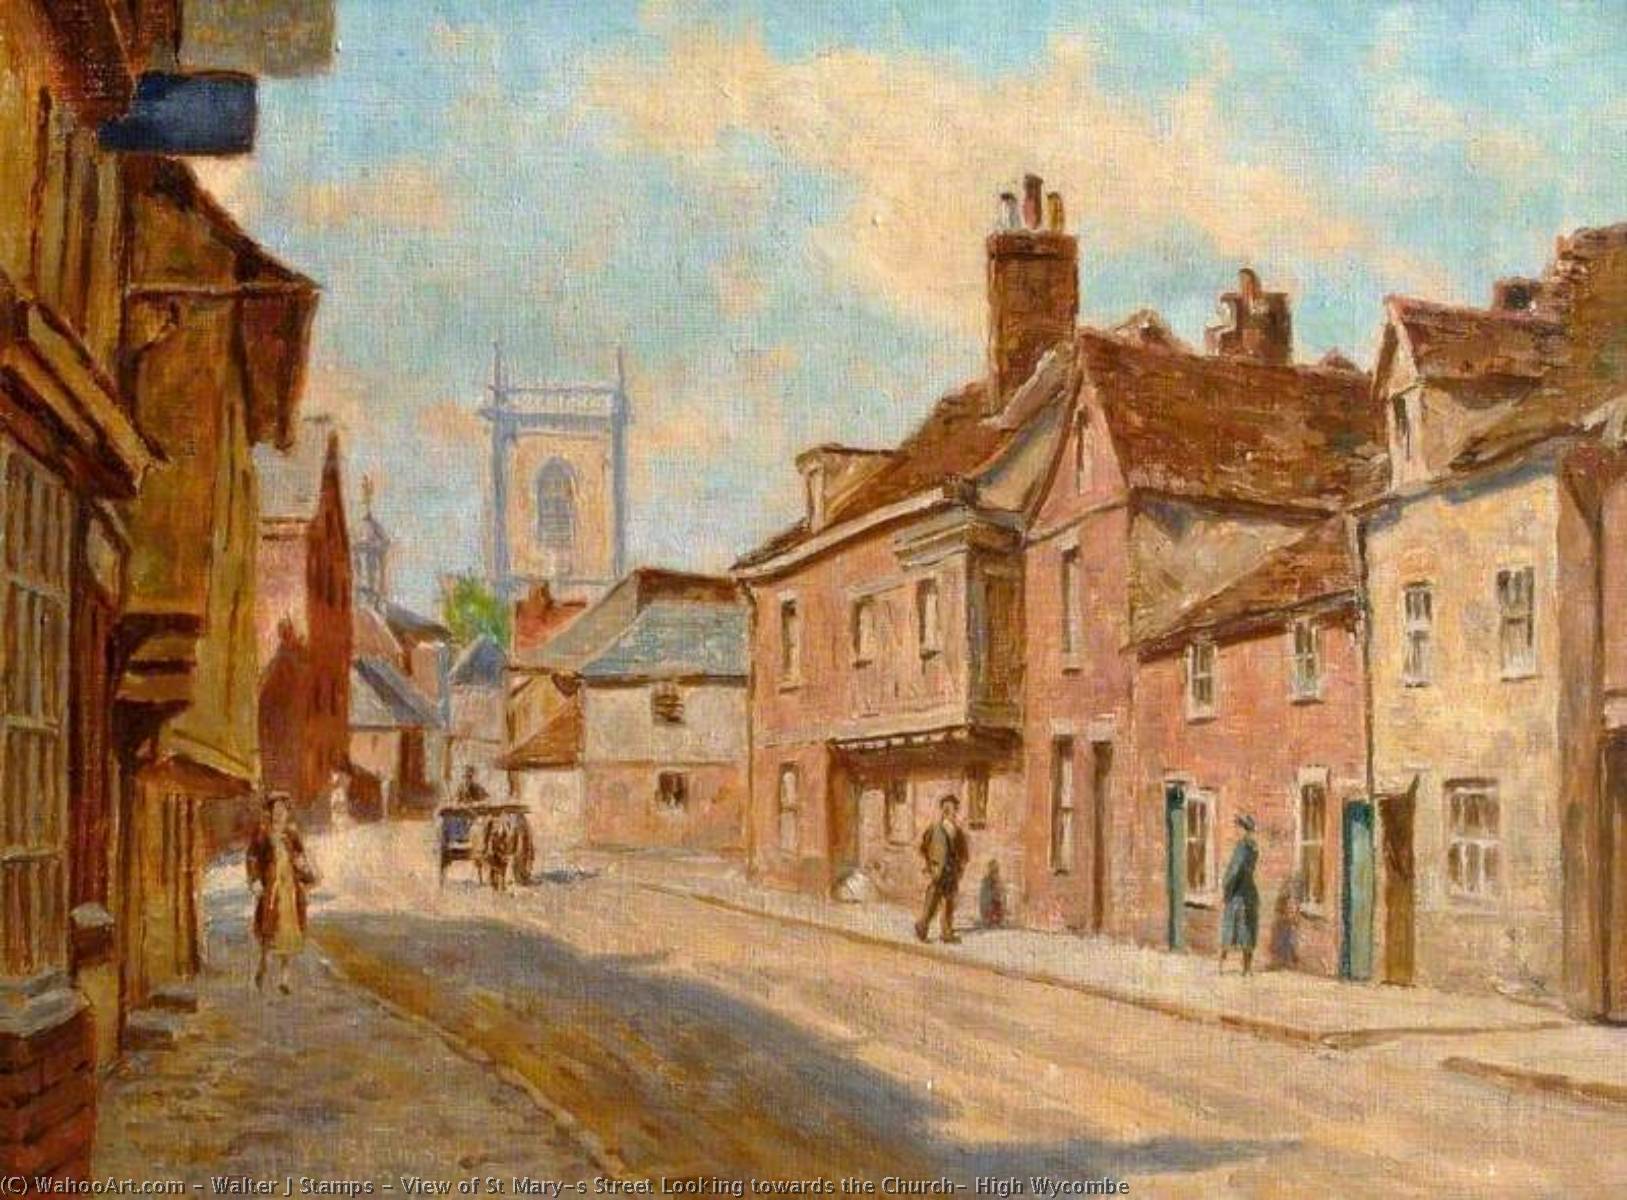 WikiOO.org - Güzel Sanatlar Ansiklopedisi - Resim, Resimler Walter J Stamps - View of St Mary's Street Looking towards the Church, High Wycombe